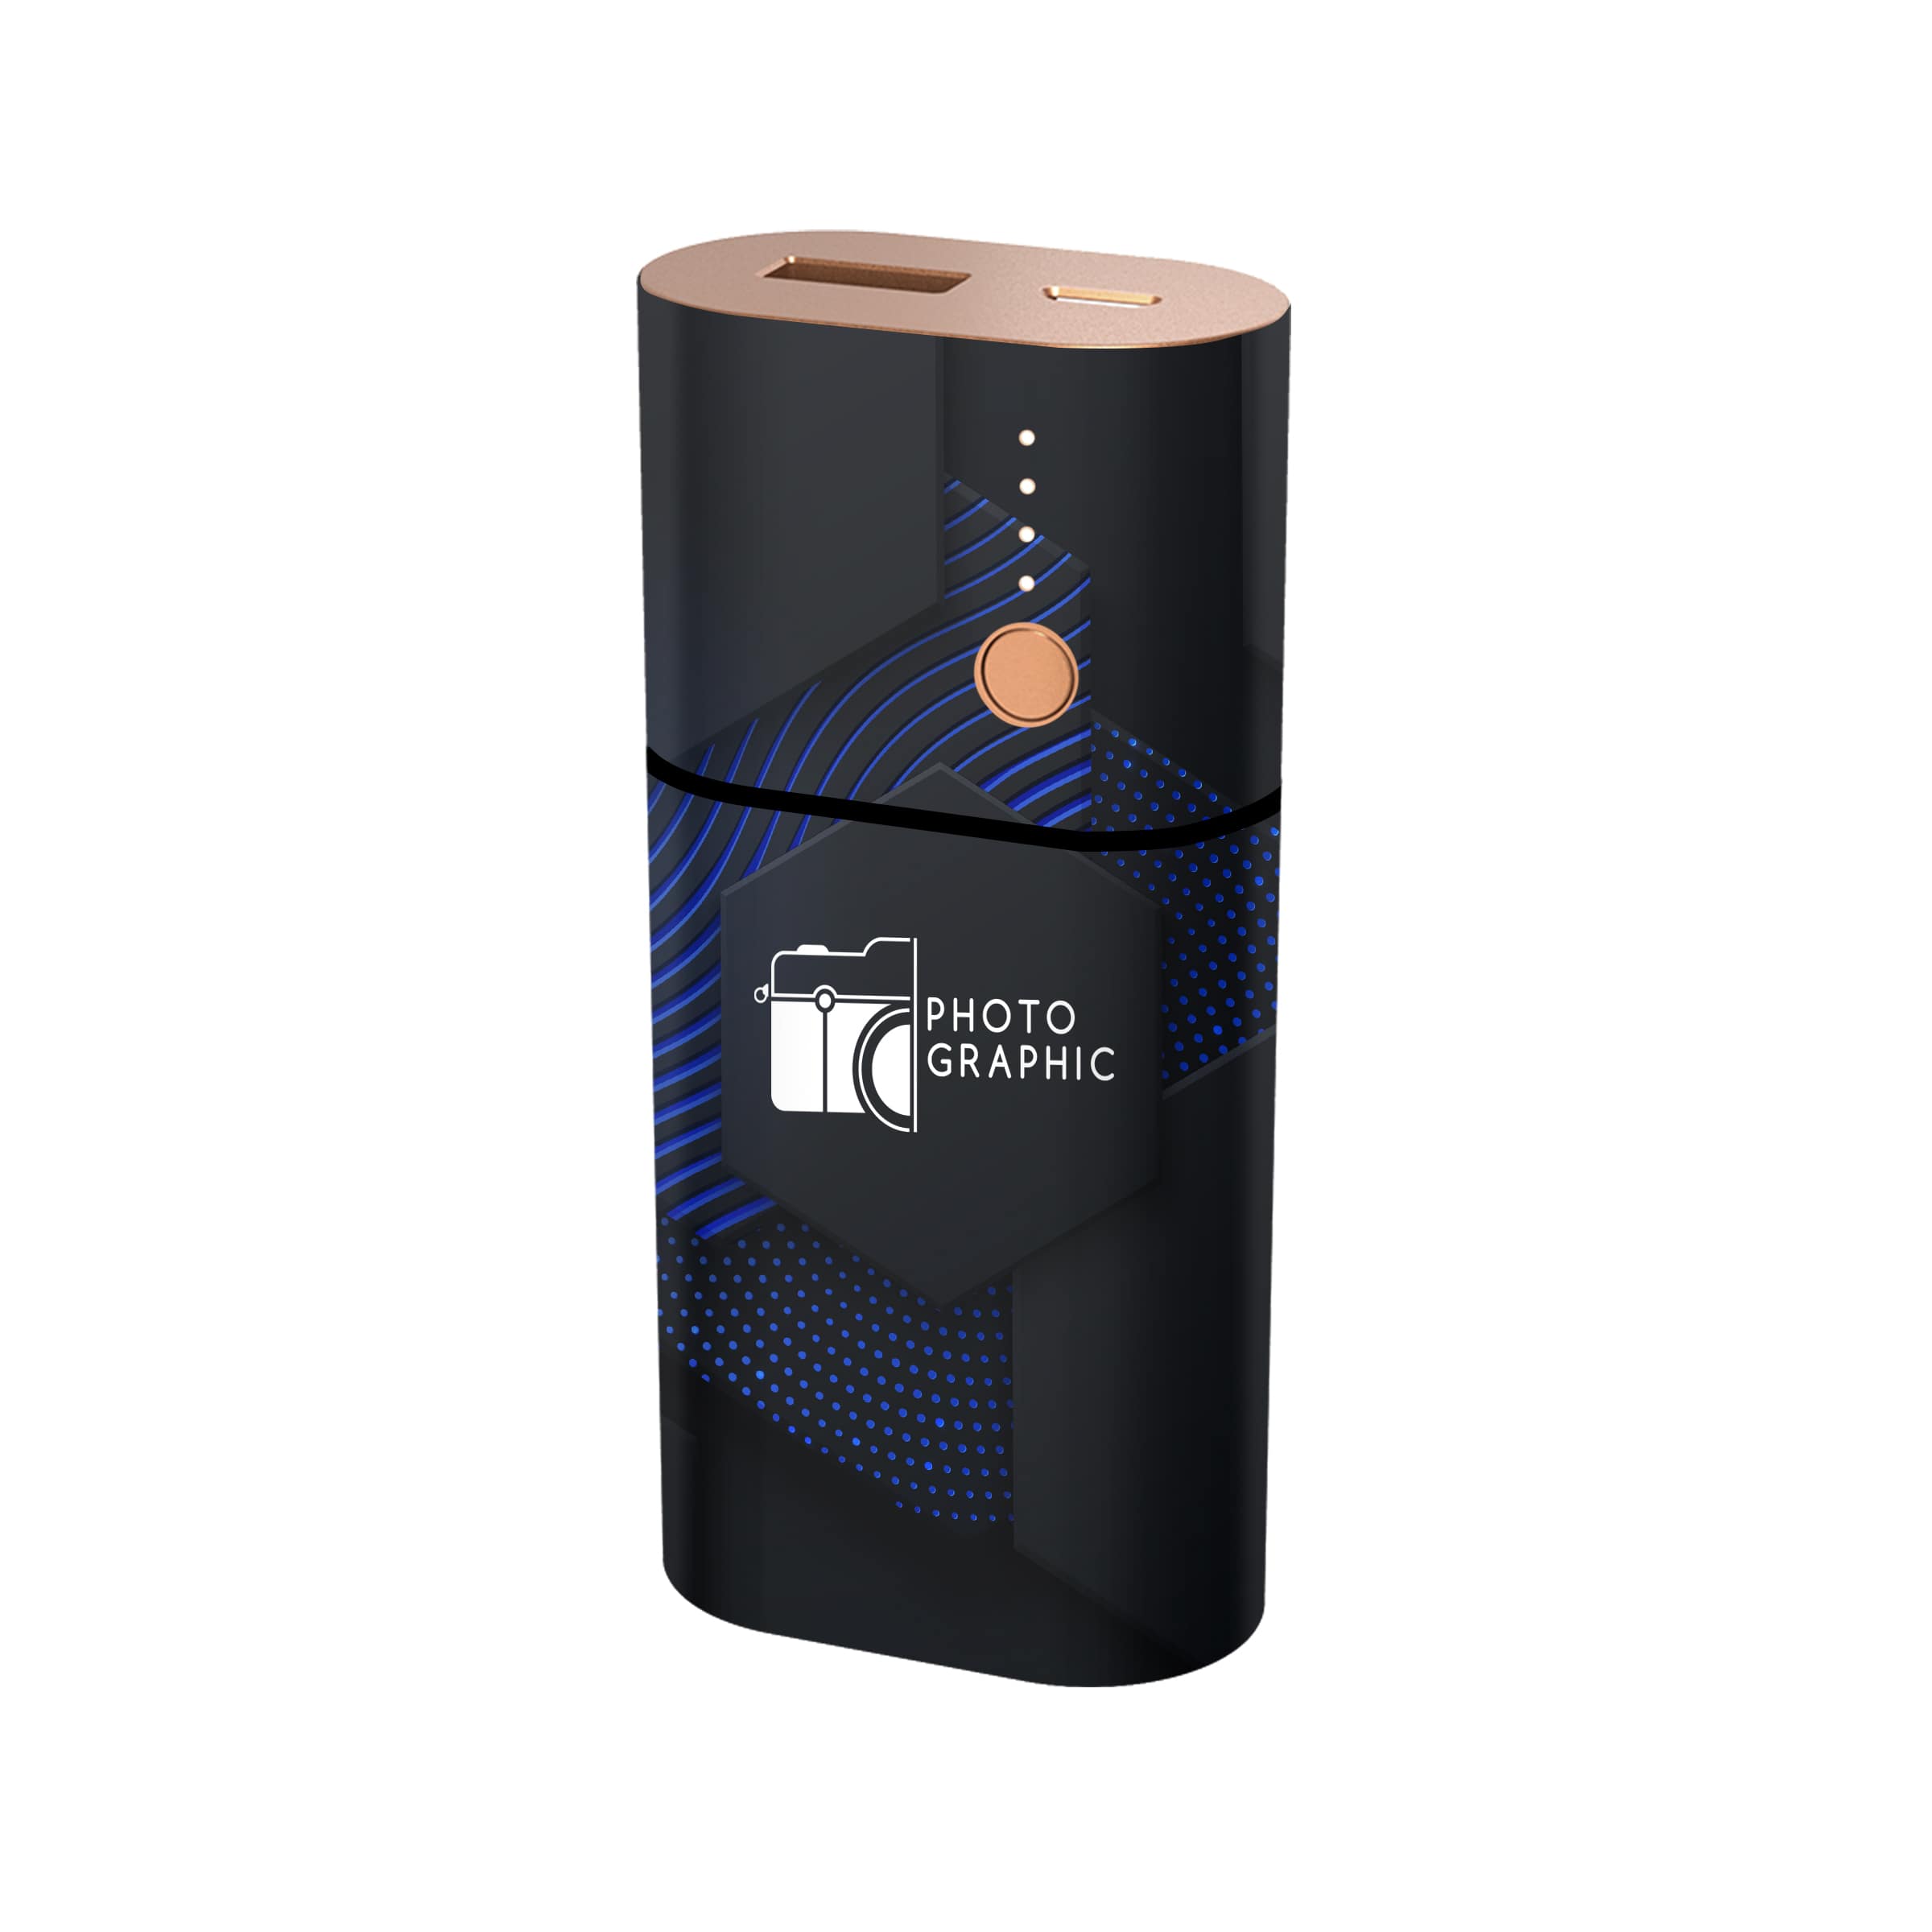 Duracell Powerbank 6700 mAh - Personalisation with a Max Print and a sleeve